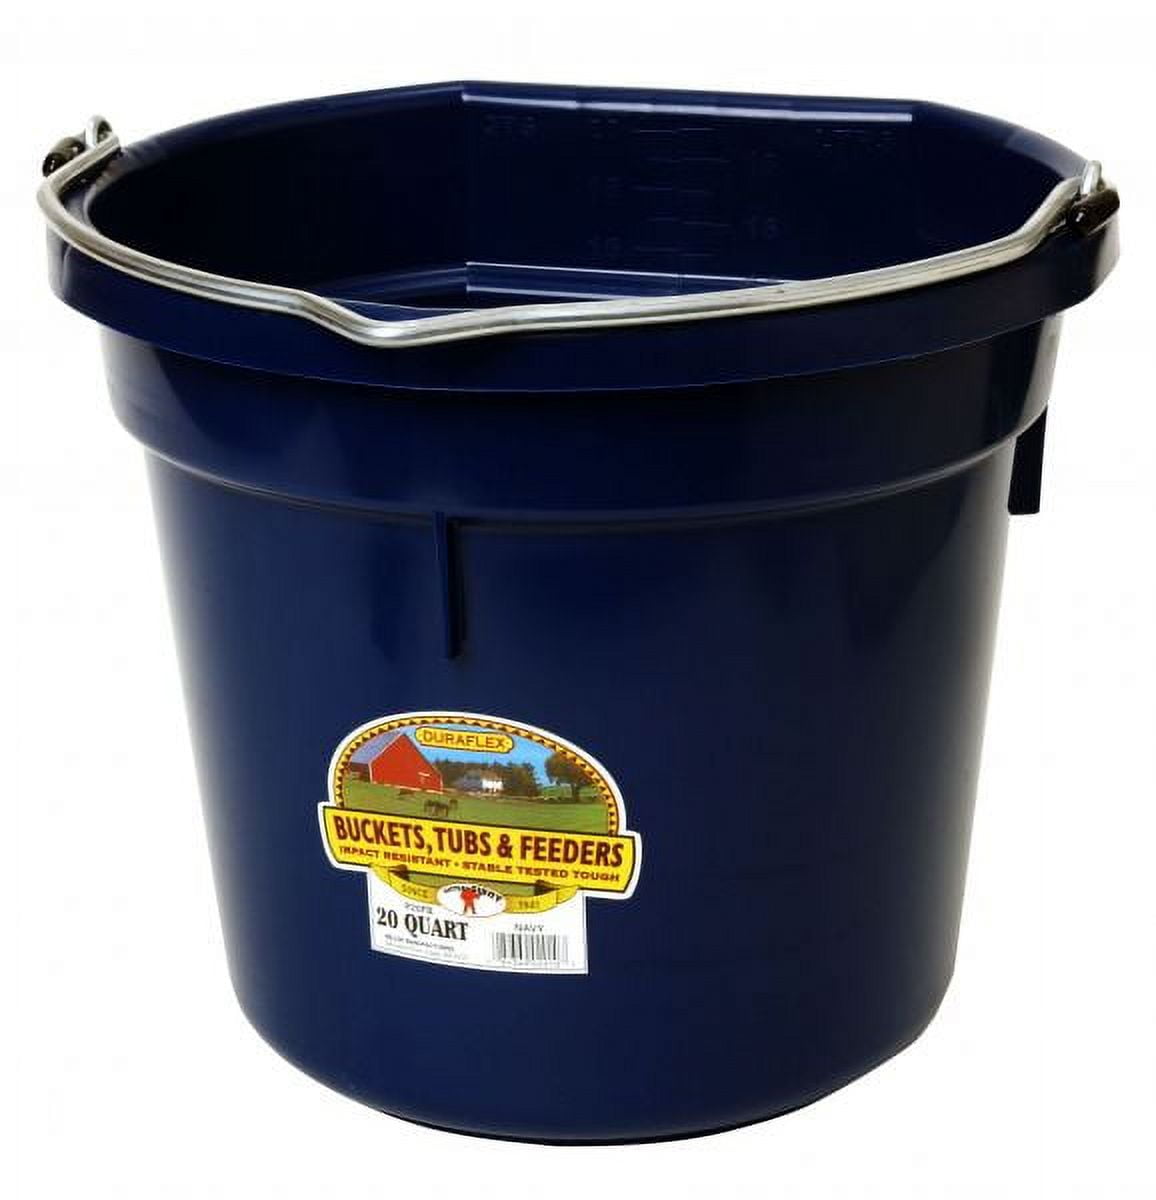 14 Qt. Blue Round Plastic Bucket with Steel Handle